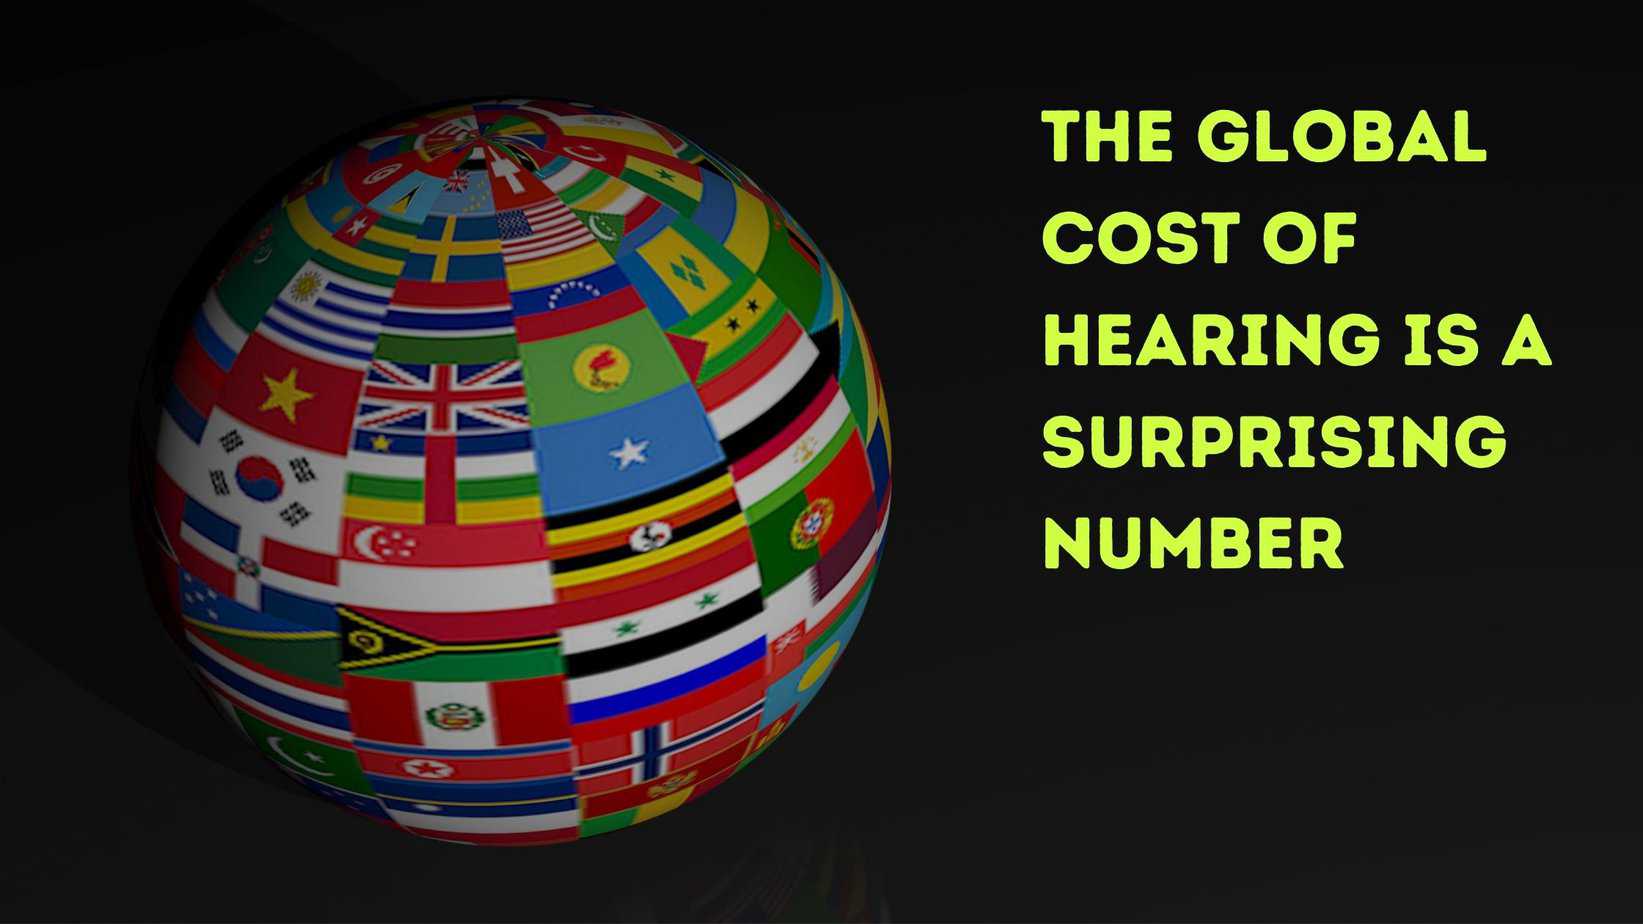 The Global Cost of Hearing is a Surprising Number